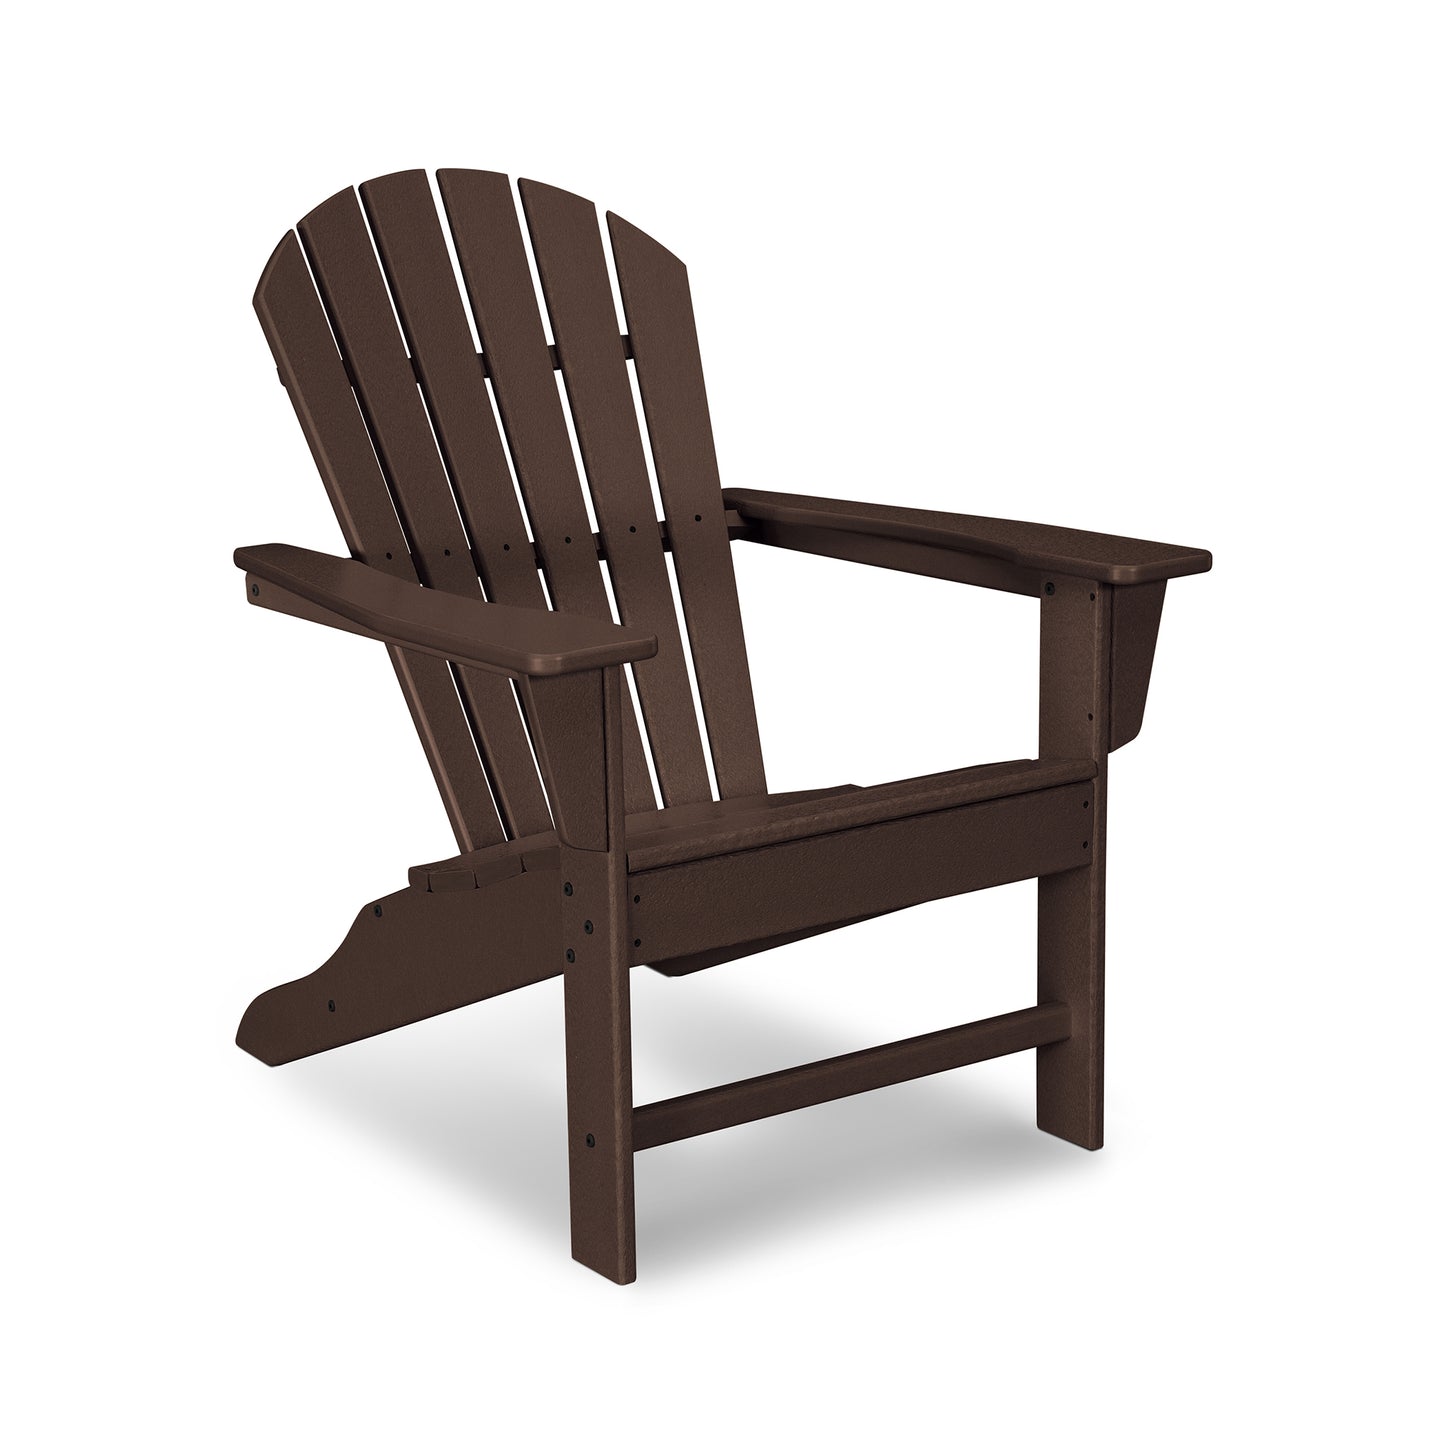 A single brown POLYWOOD® South Beach Adirondack chair made of recycled plastic resin furniture is displayed against a plain white background. The chair features a classic slatted design with a curved back and broad.